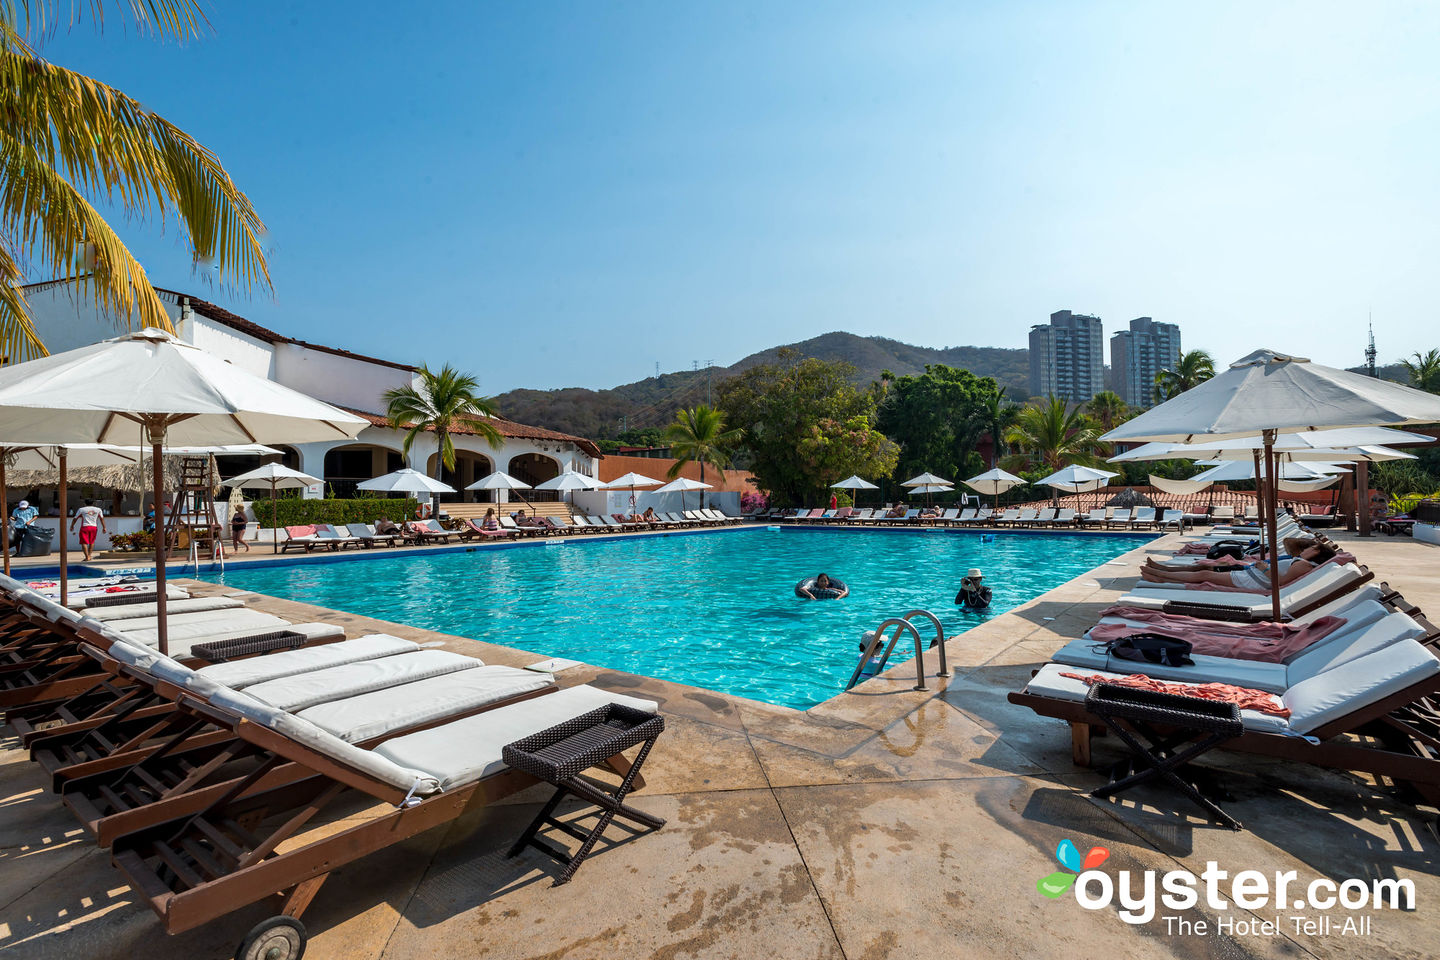 Club Med Ixtapa Pacific Review: What To REALLY Expect If You Stay